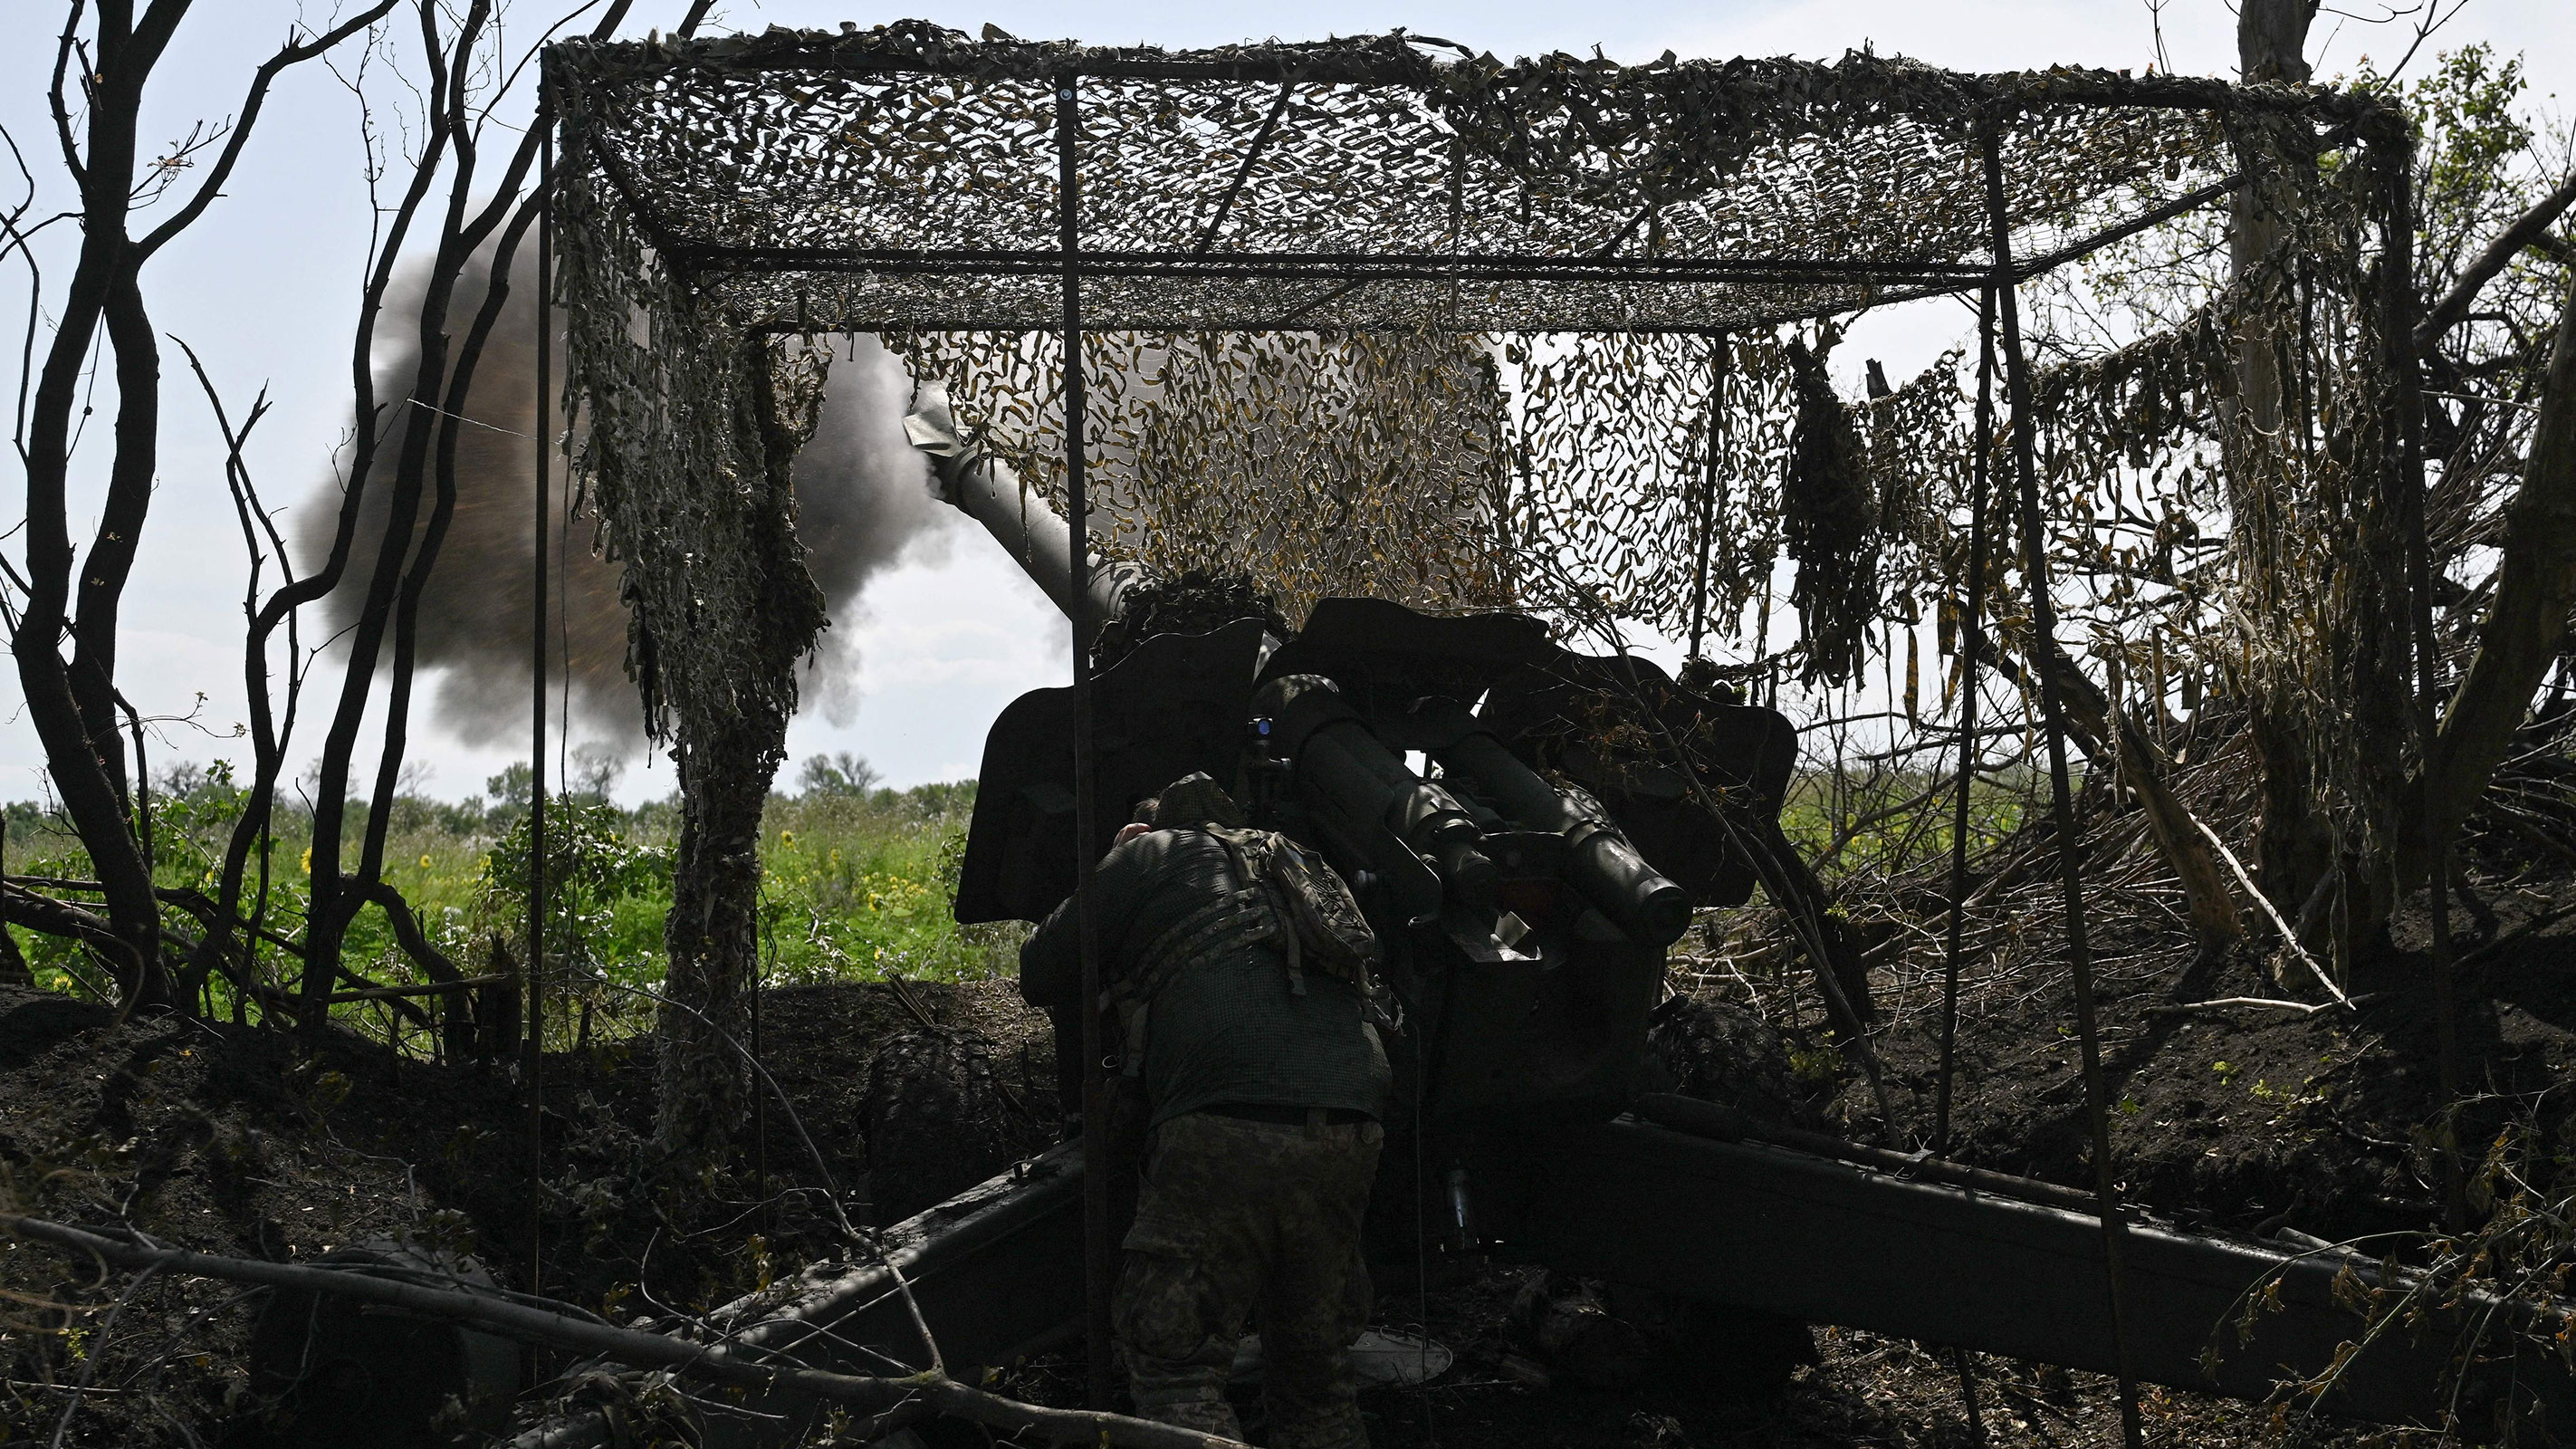 A Ukrainian artilleryman fires a 152mm towed gun-howitzer D-20 at Russian positions on the front line near Bakhmut, eastern Ukraine, on July 20, 2023, amid the Russian invasion of Ukraine.